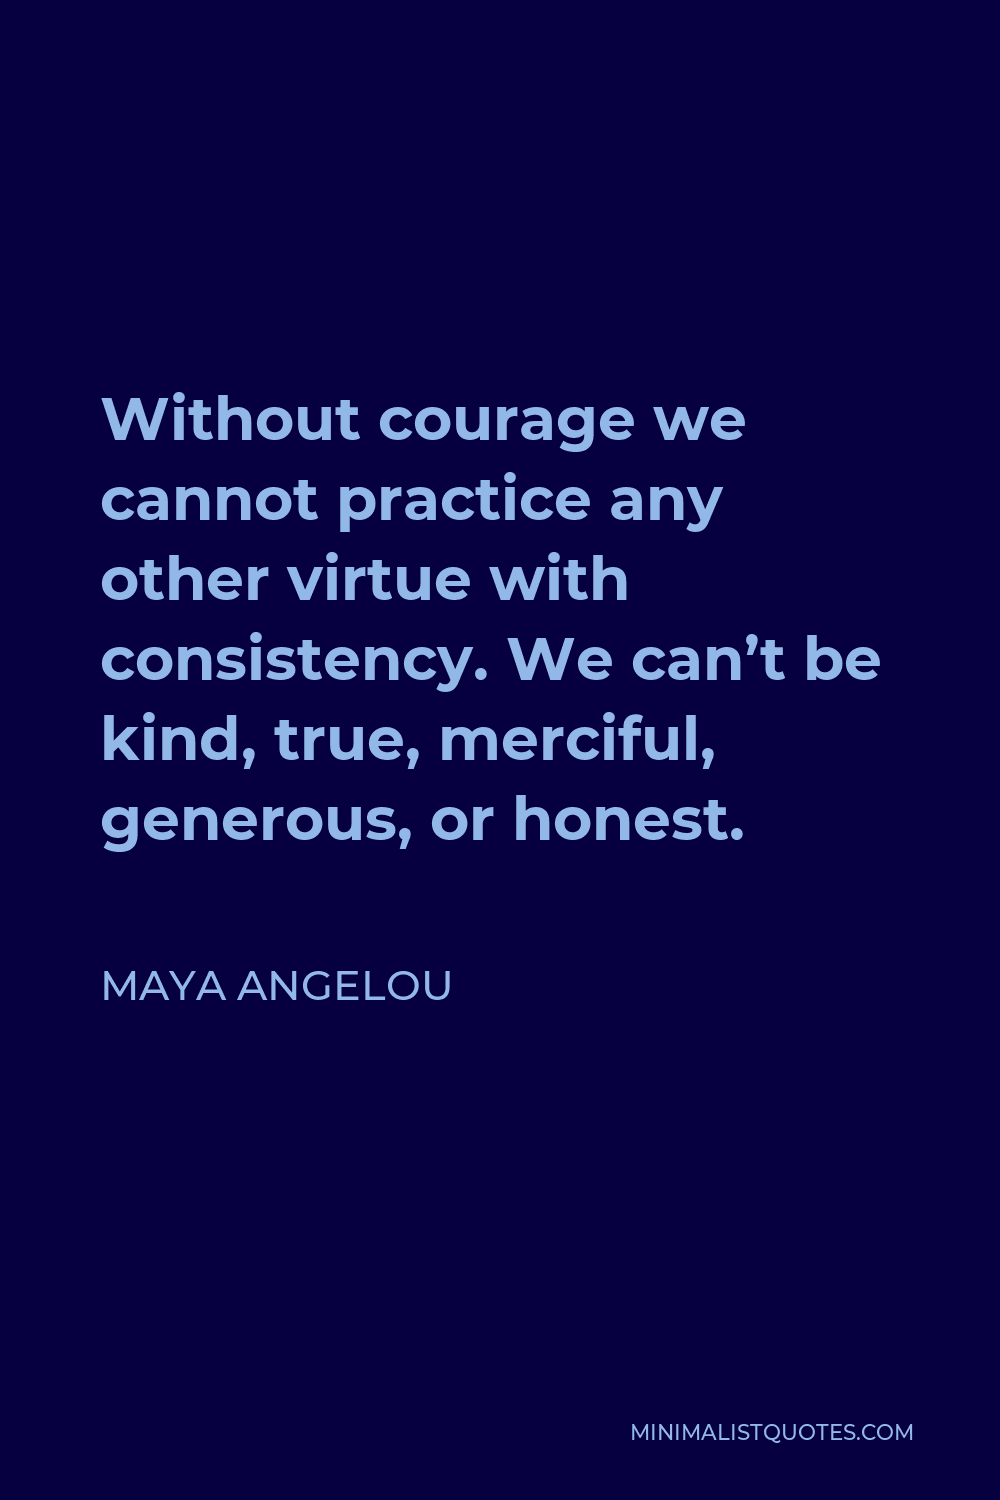 Maya Angelou Quote: Without courage we cannot practice any other virtue ...